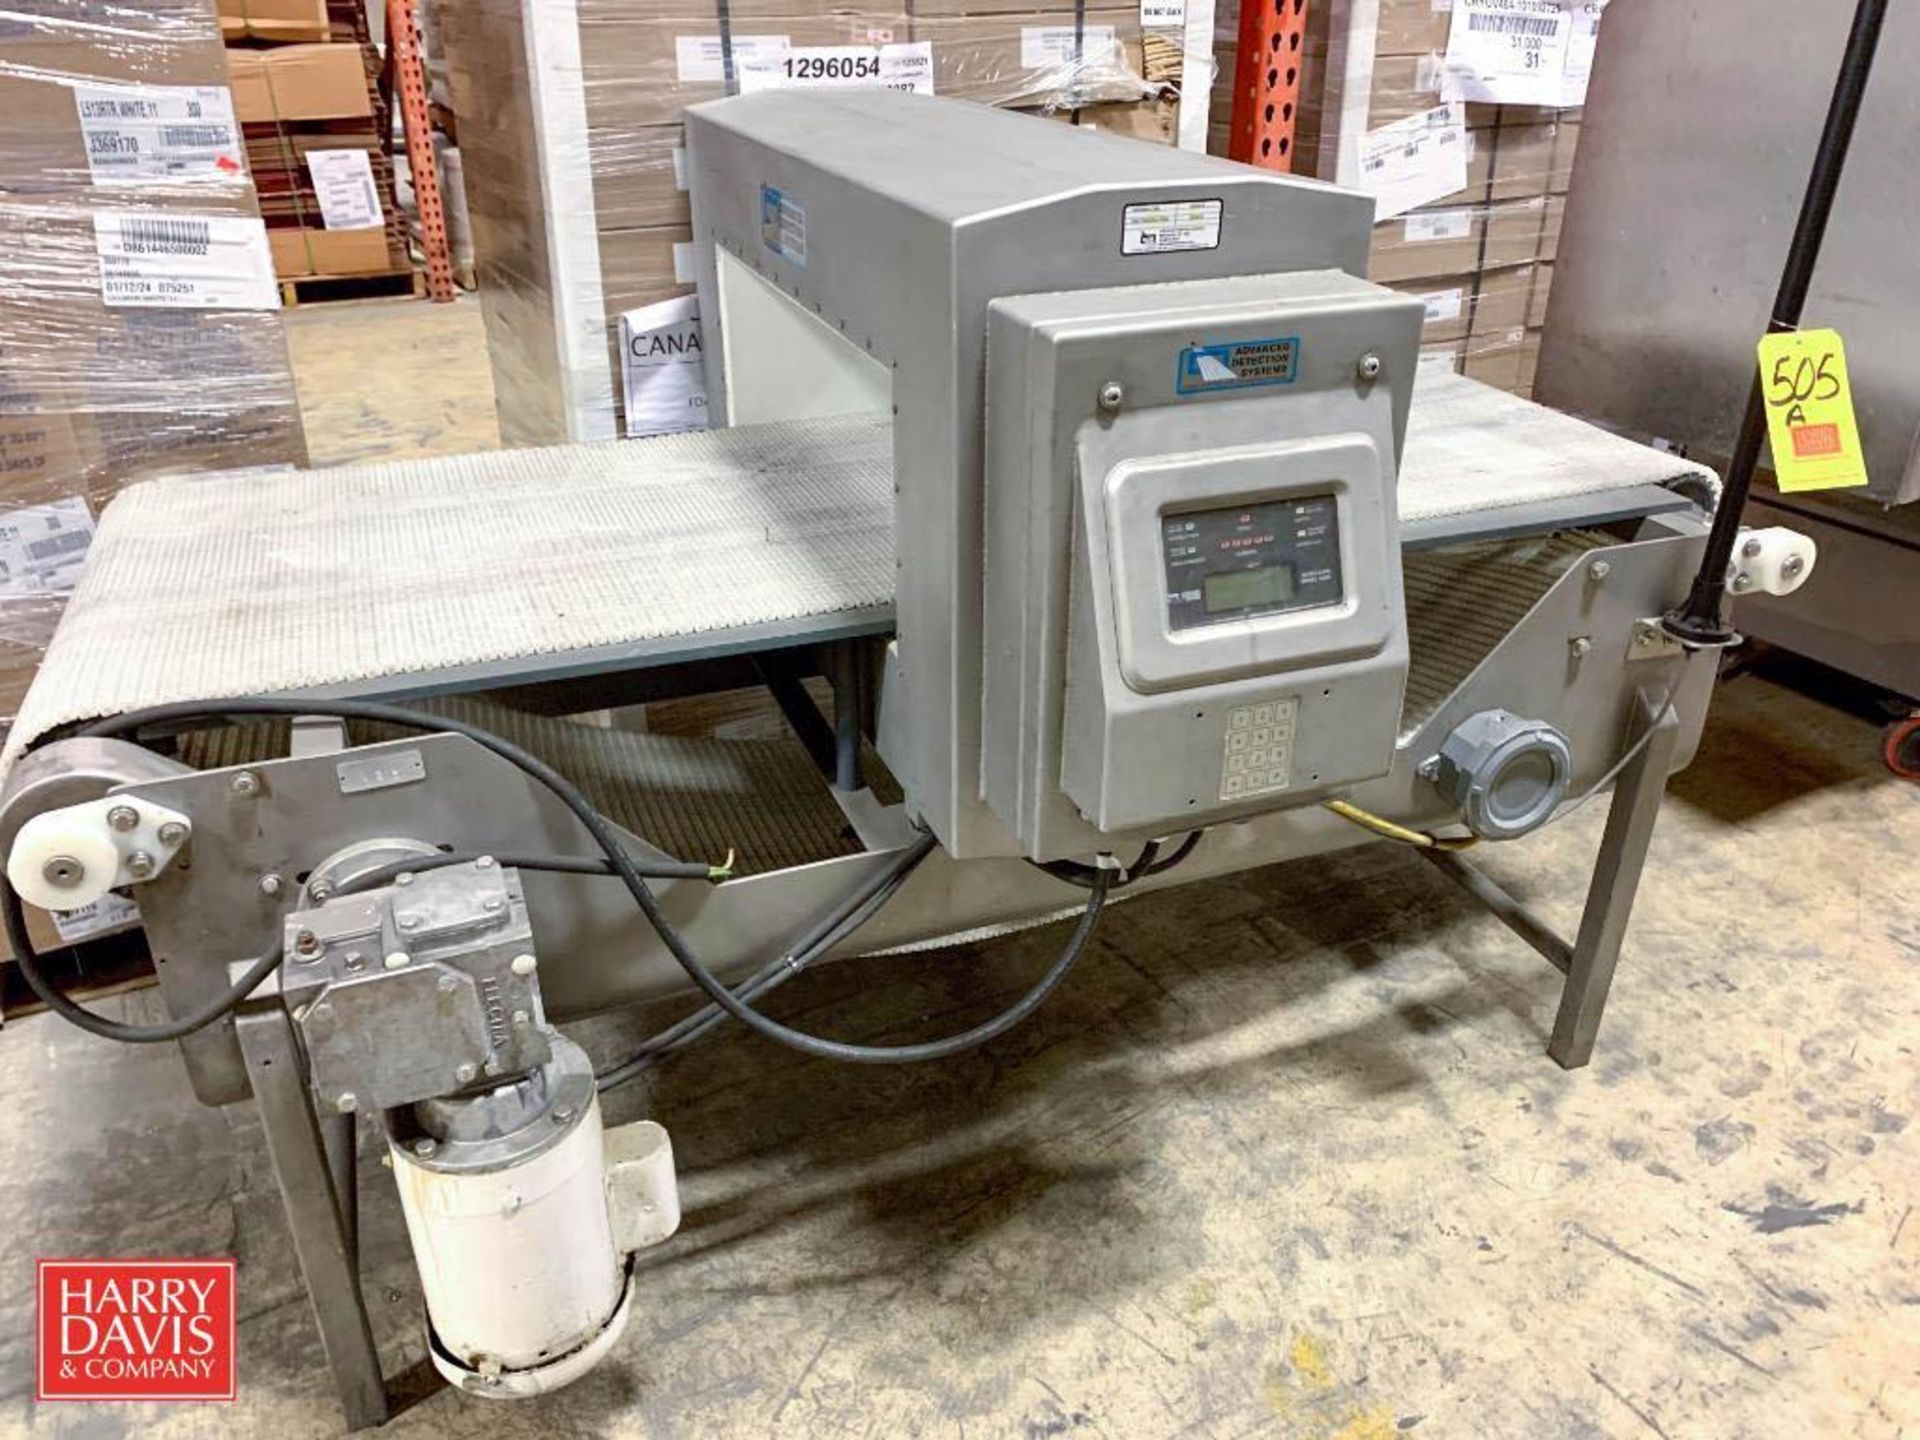 Advanced Detection Metal Detector with 26” x 9 1/2" Aperture and Power Conveyor: 24" Width (Location